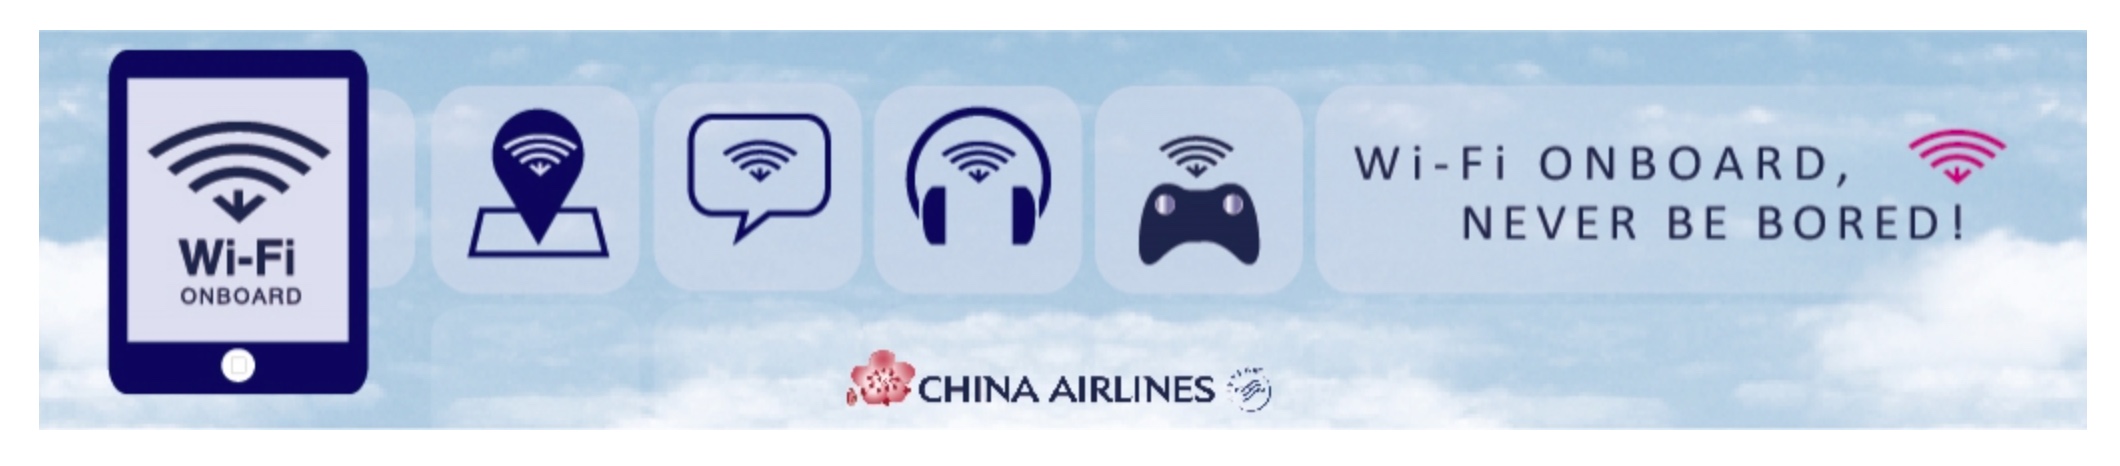 China Airlines Wifi Internet 03